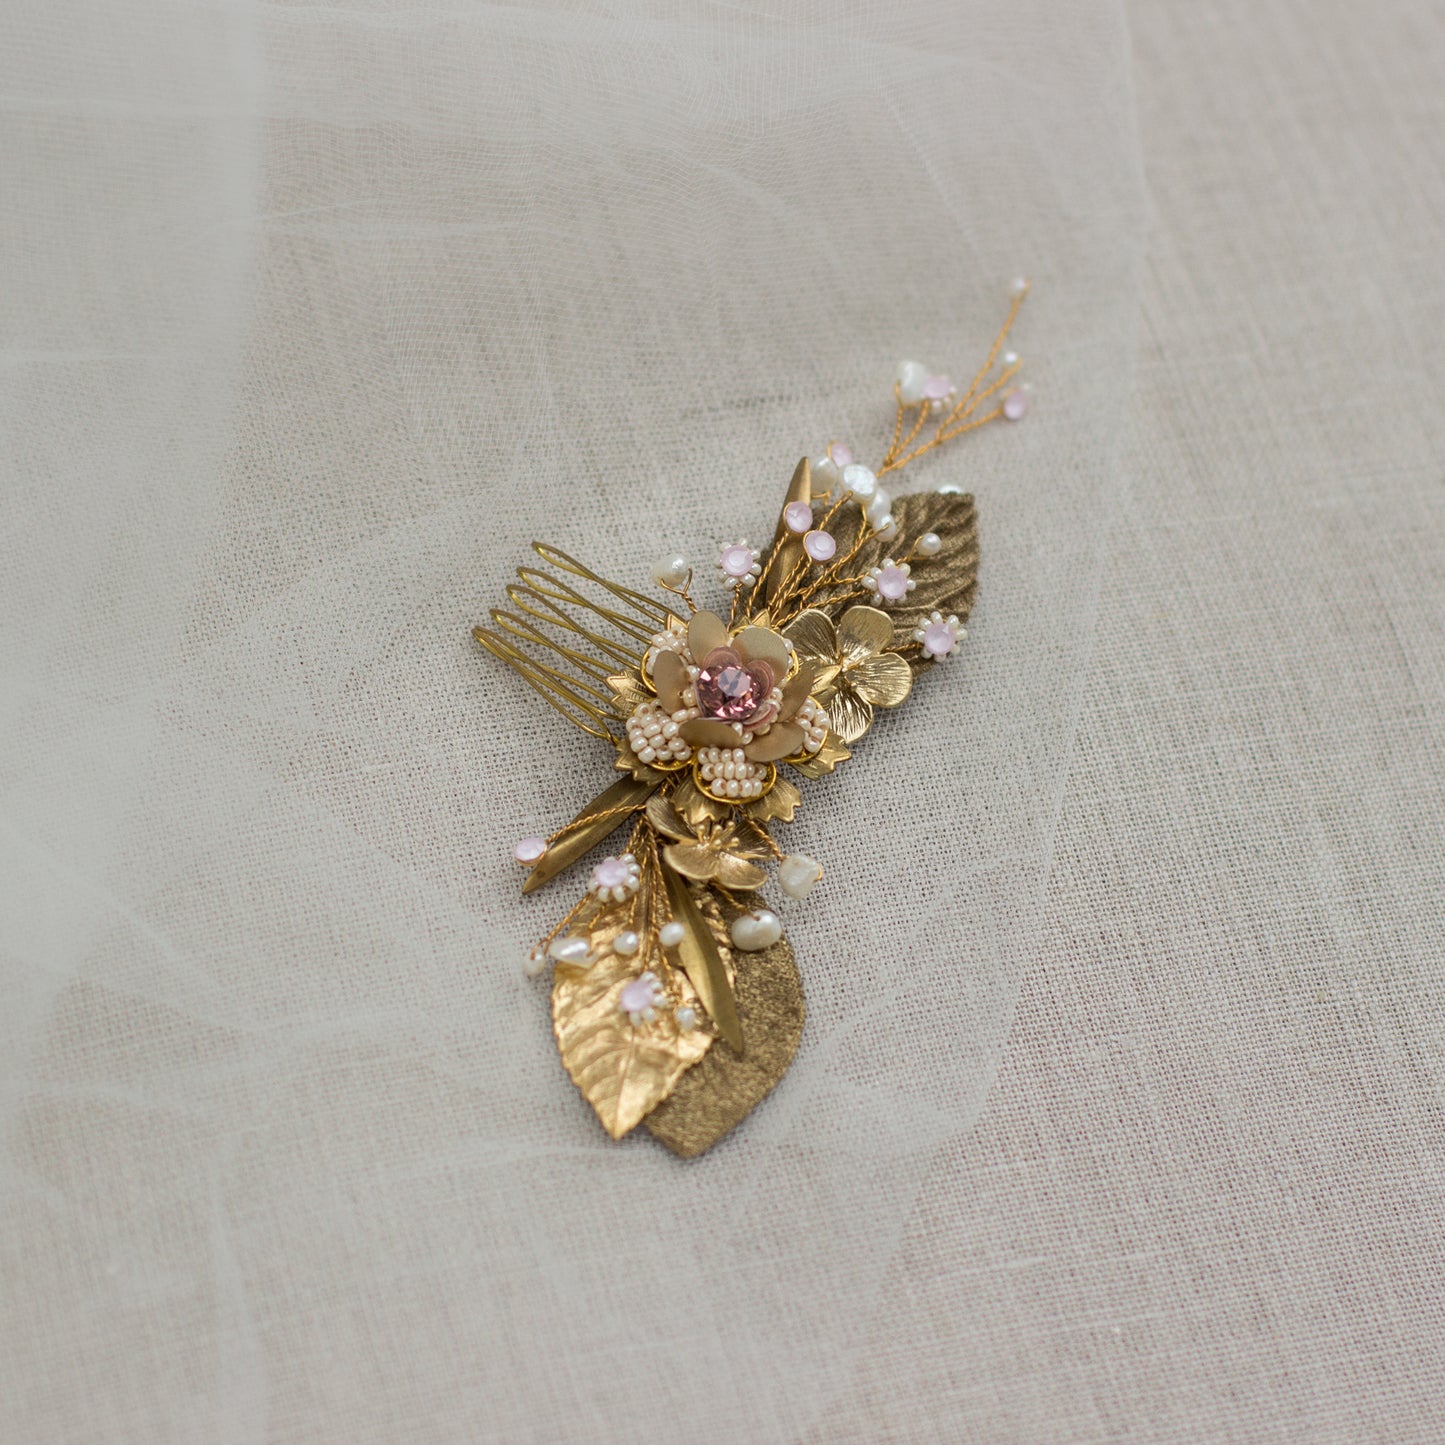 Bridal hair comb, Floral hairpiece, Gold hairpiece, Handmade Wedding hair accessories, Pearl Wedding headpiece, Gold fascinator, Wedding fascinator, Crystal hair comb, Gold hair comb, 